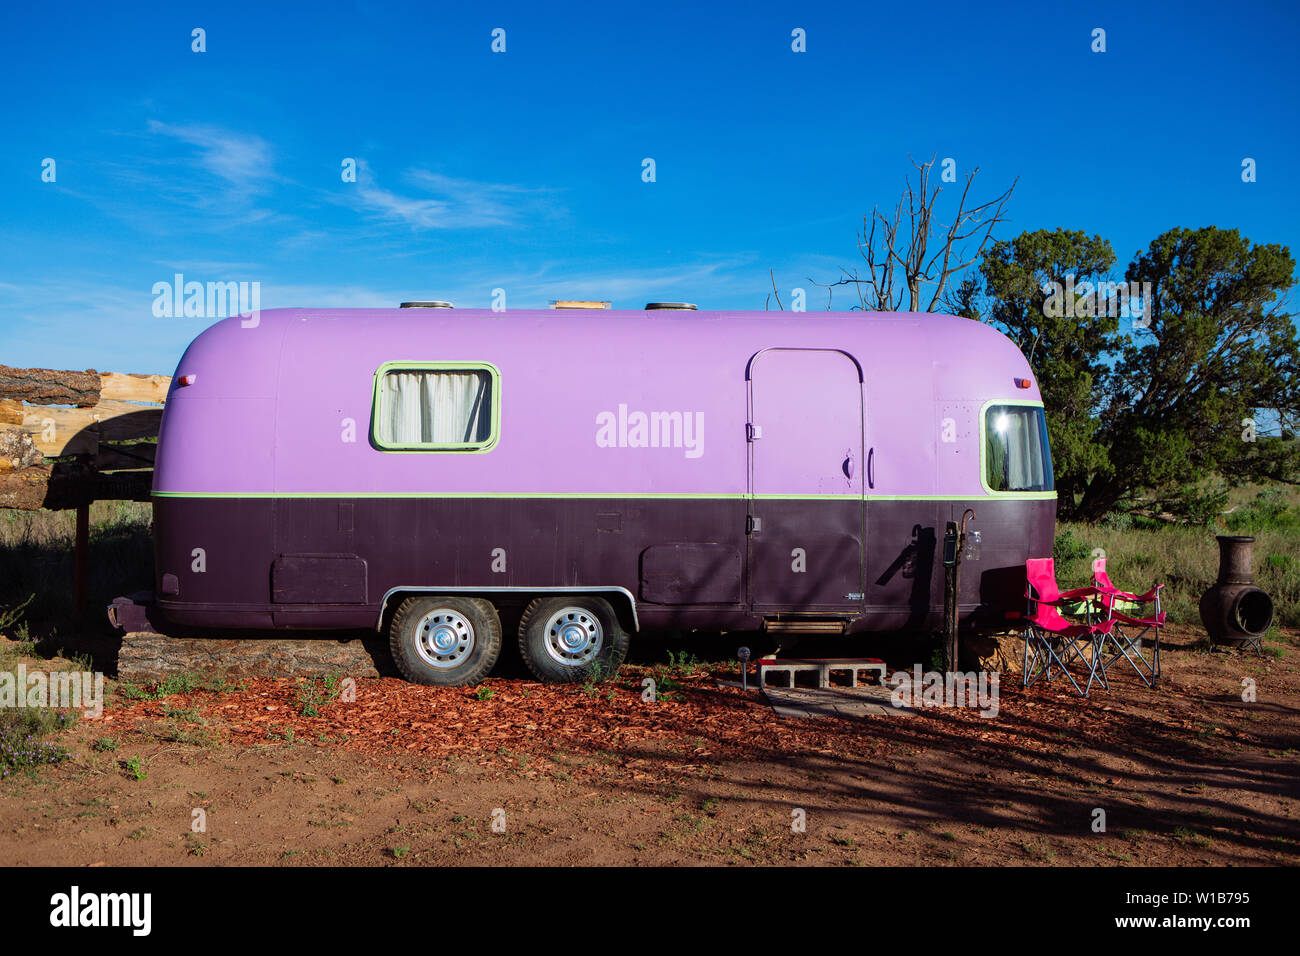 Airstream trailer lodging in an Alternative Eco friendly Campground Glamping 'The Nest' in Williams, Arizona, USA, near the Grand Canyon Stock Photo